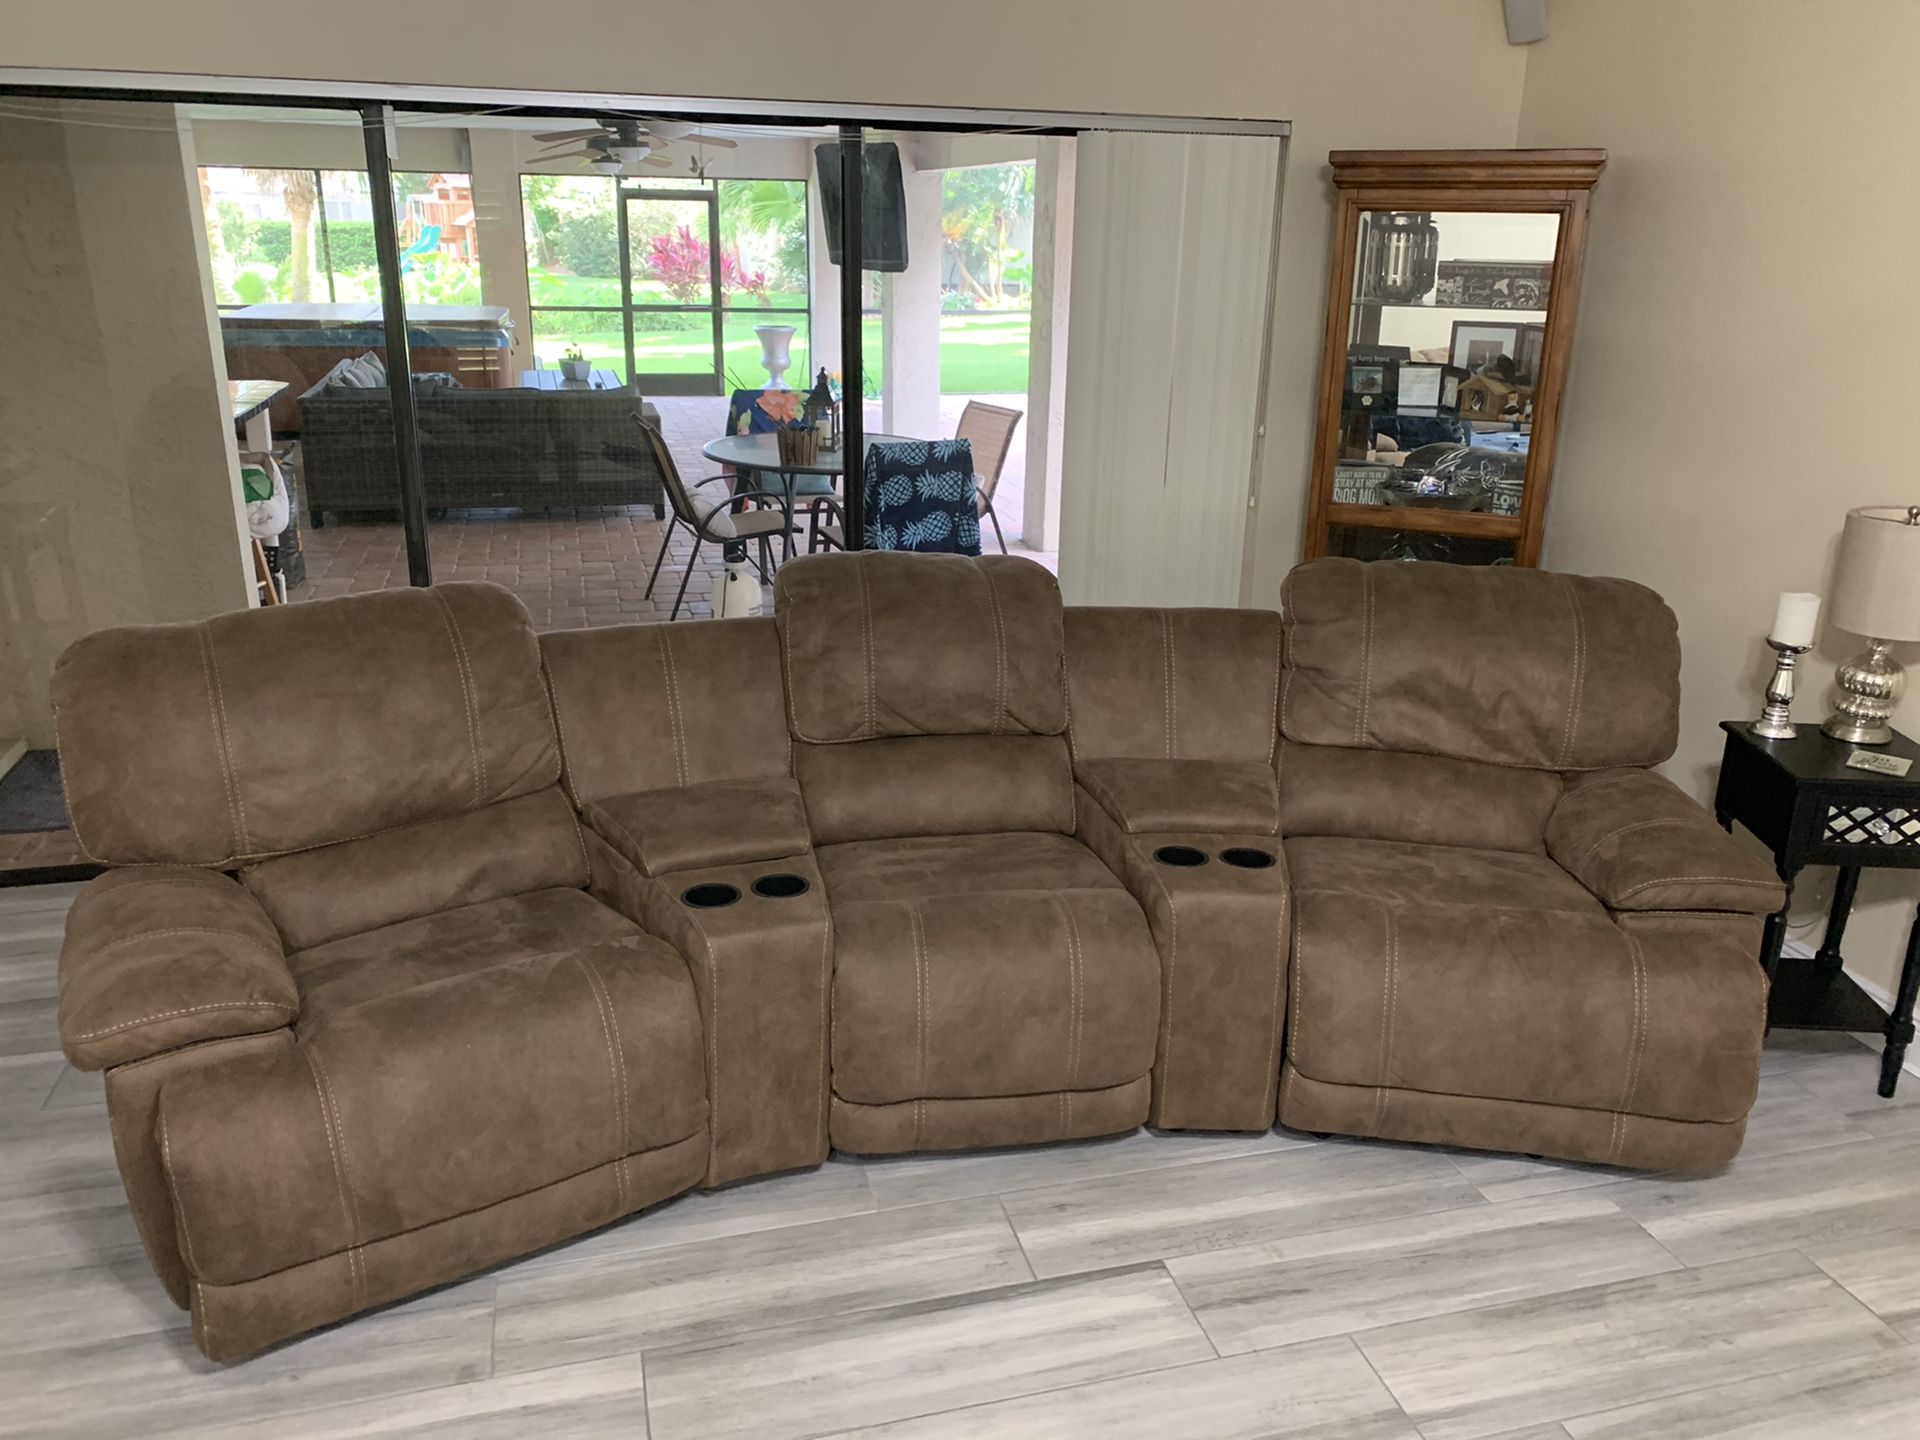 Macy’s 6 piece Sectional with Recliner Rockers